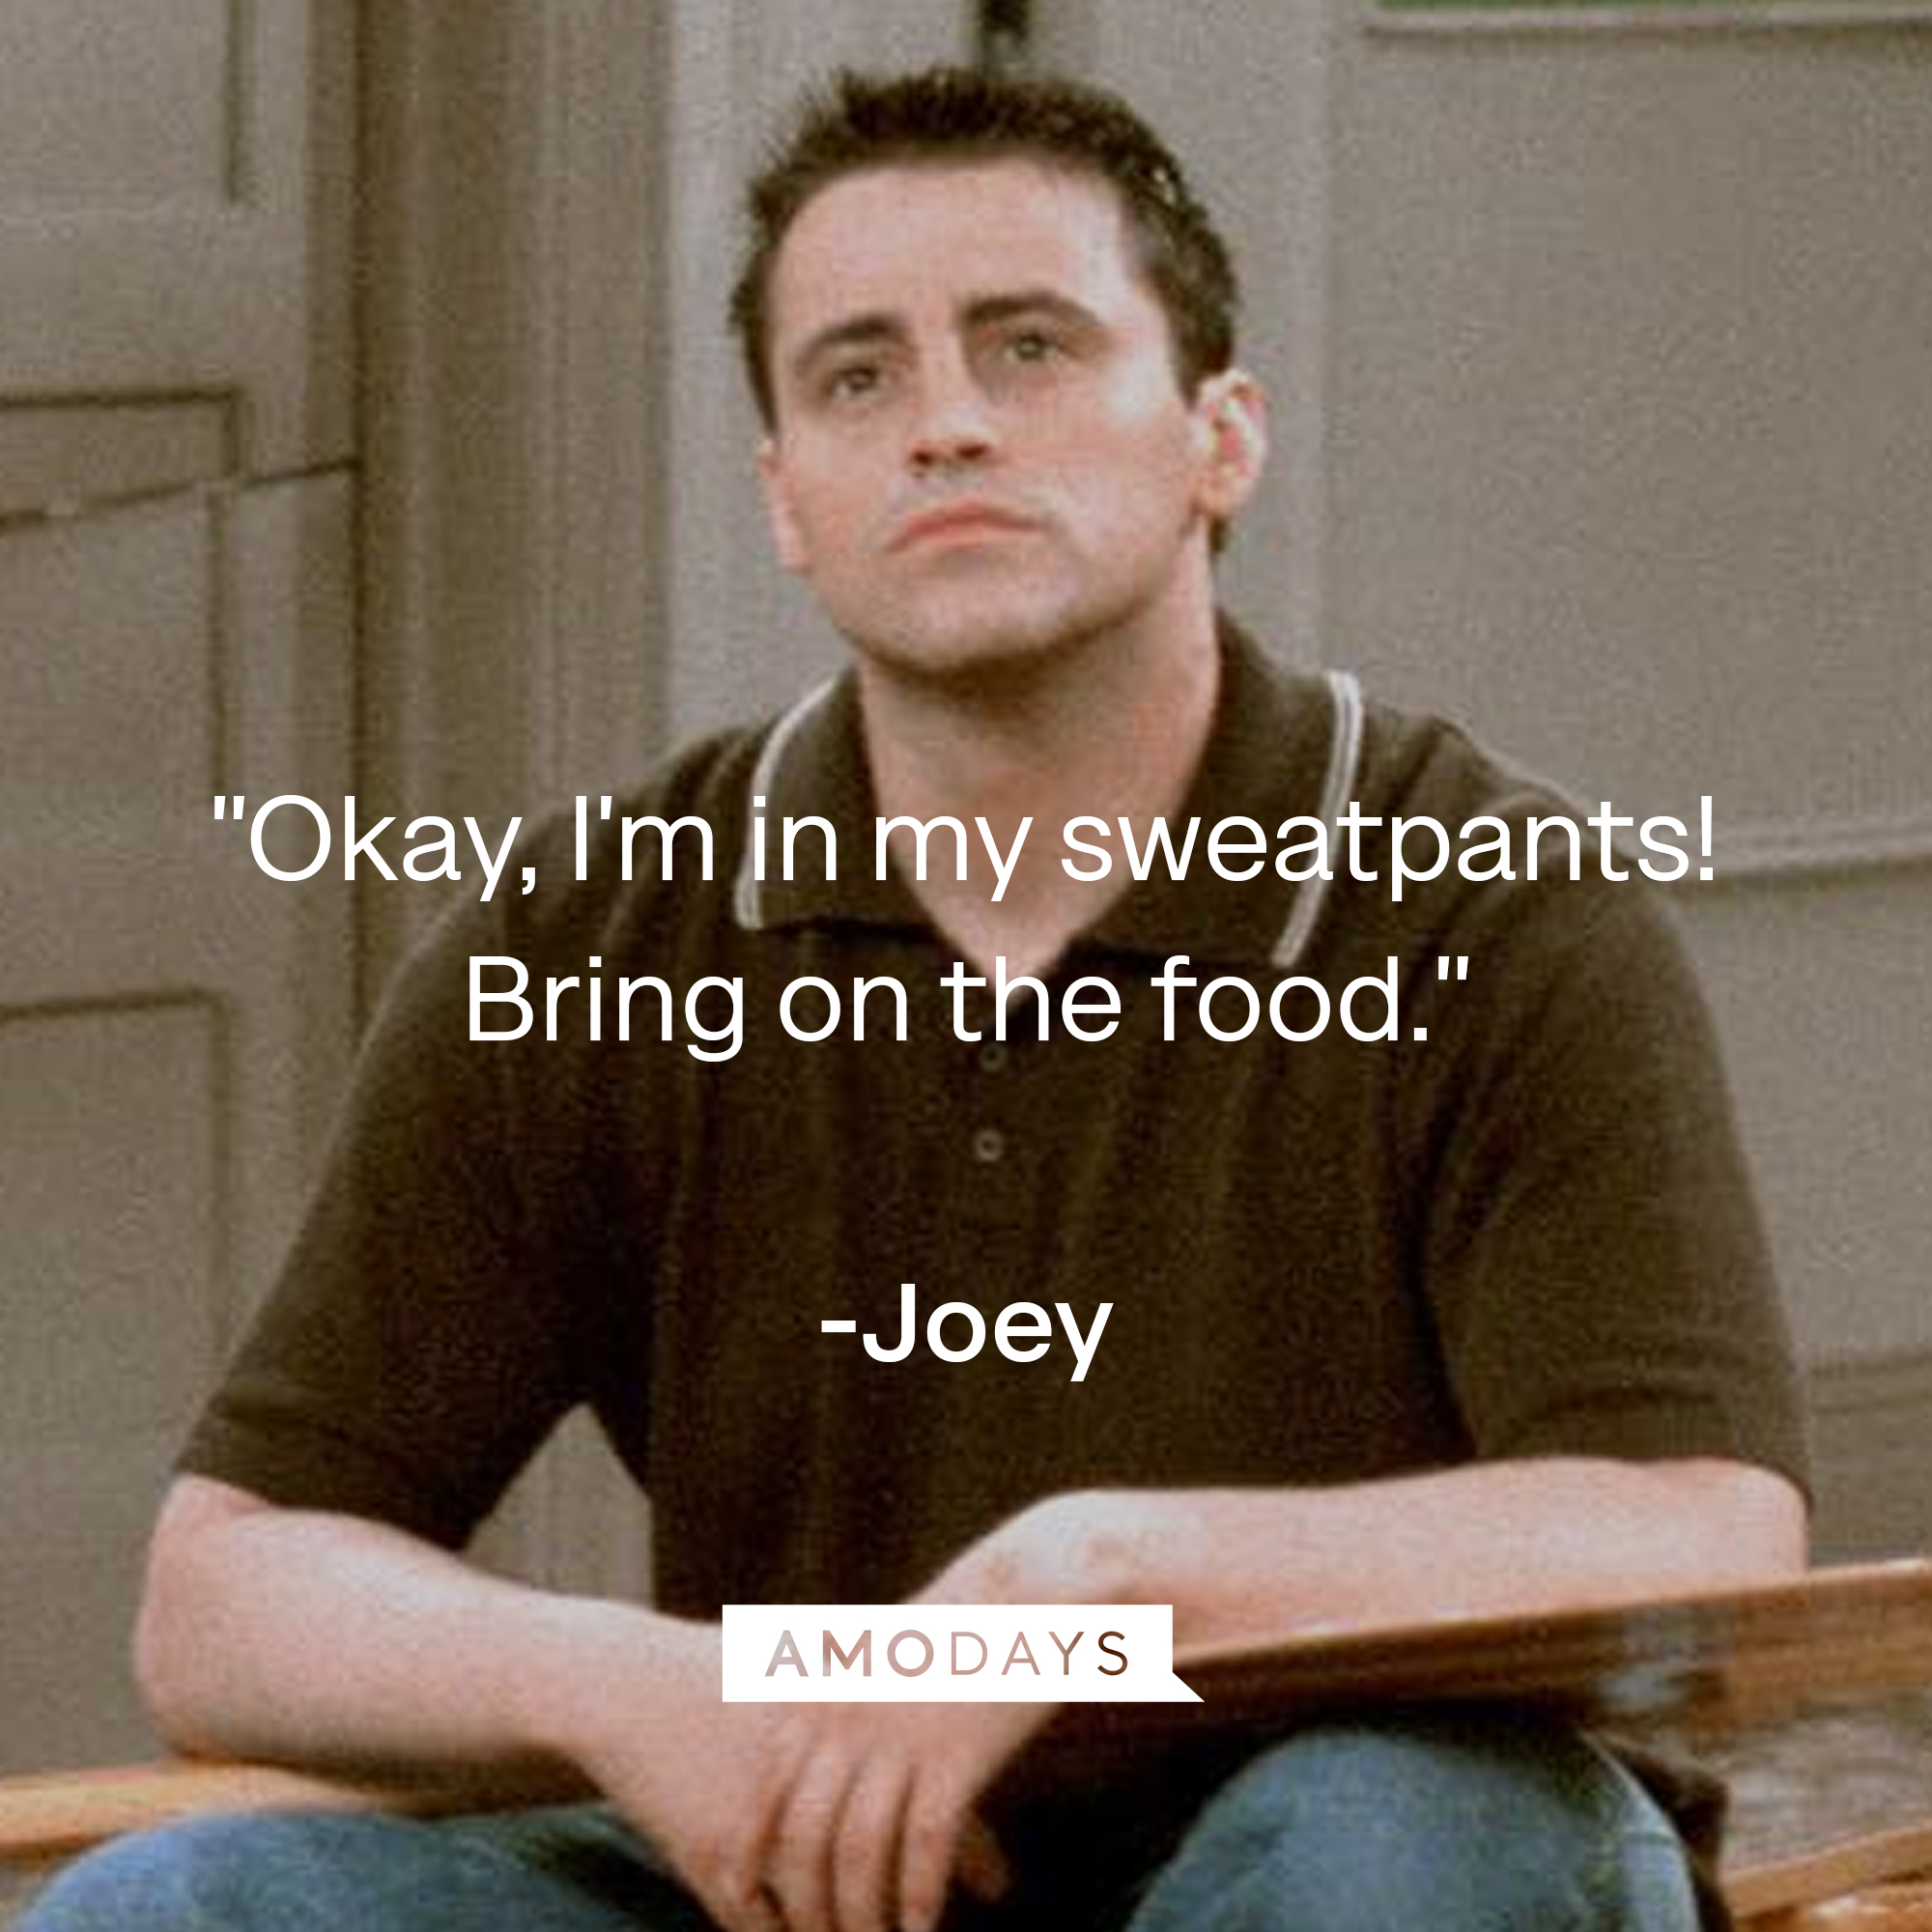 Joey’s quote: "Okay, I'm in my sweatpants! Bring on the food." | Source: Facebook/friends.tv